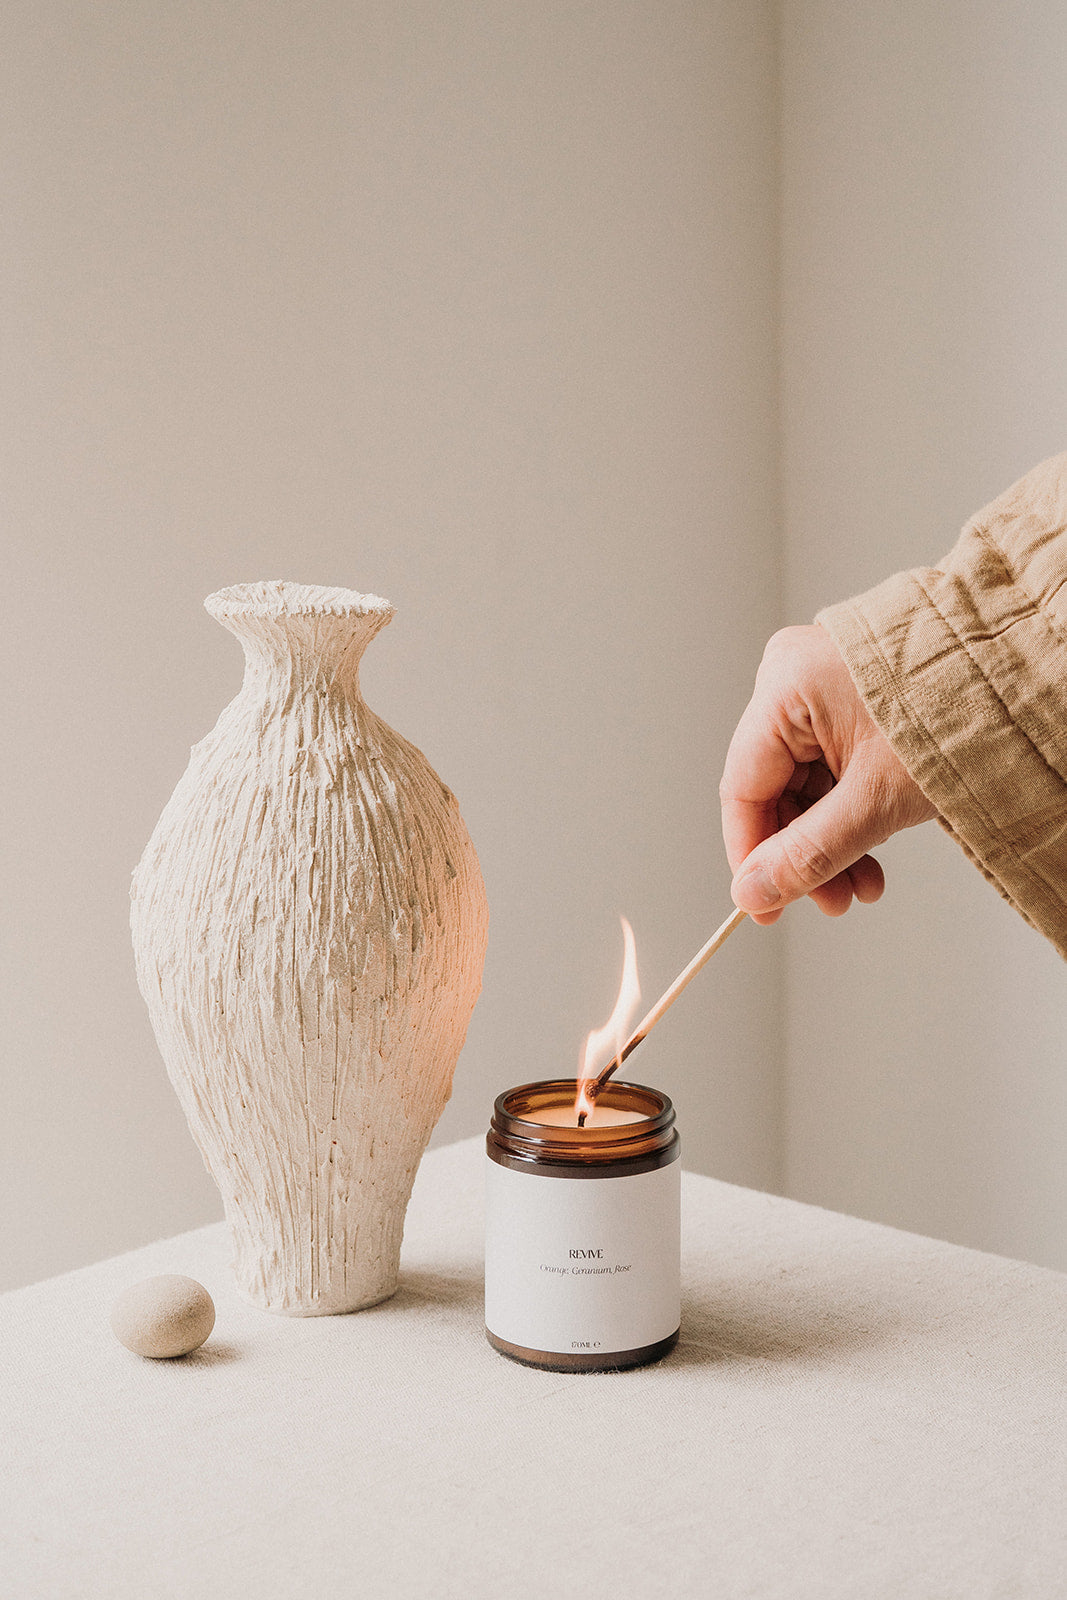 candle in brown glass jar being lit by long match and one hand, next to a cream vase